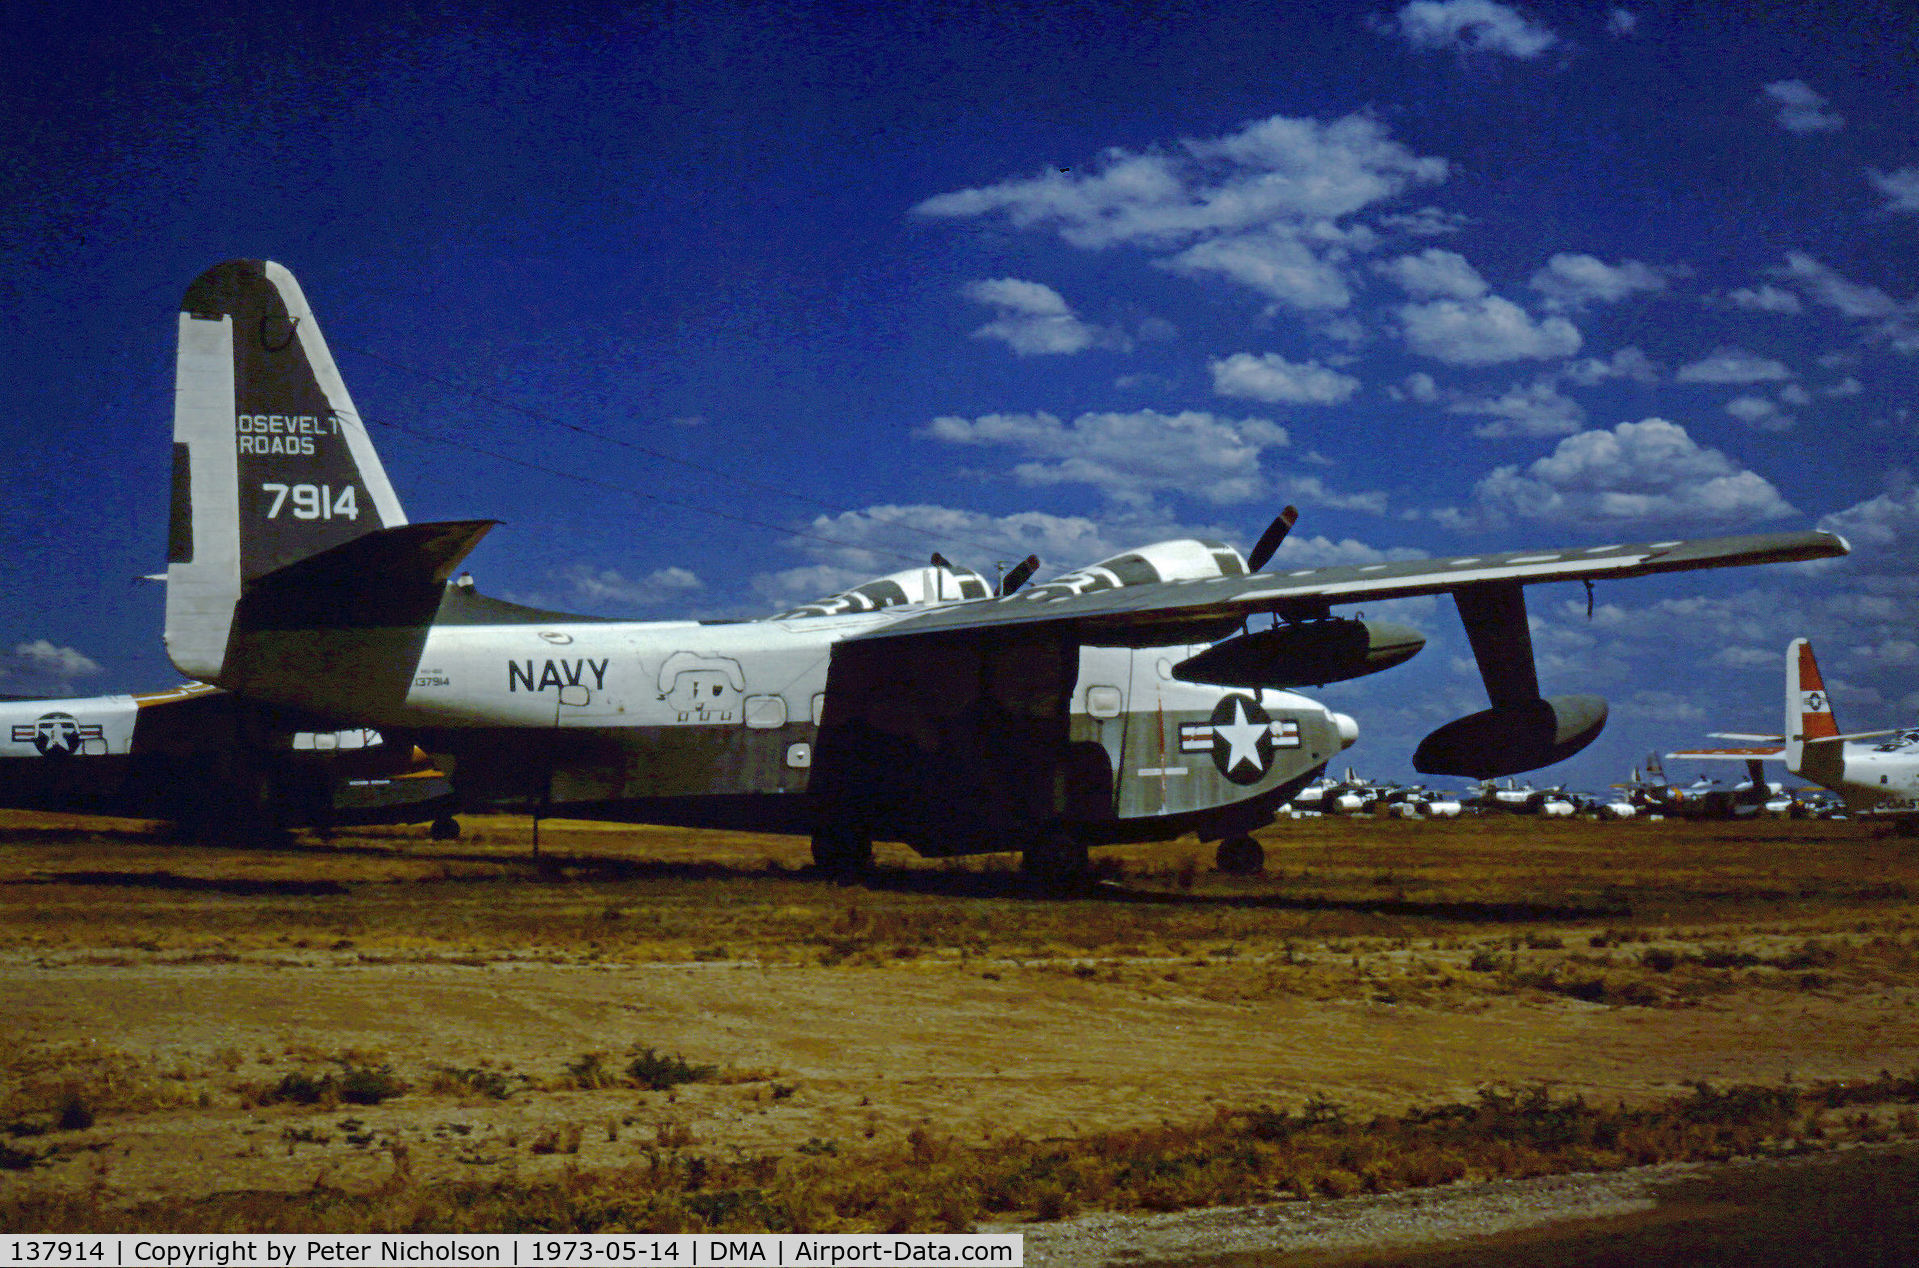 137914, Grumman HU-16C (UF-1) Albatross C/N G-387, HU-16C Albatross in storage in May 1973 at what was then known as the Military Aircraft Storage & Disposition Centre (MASDC).